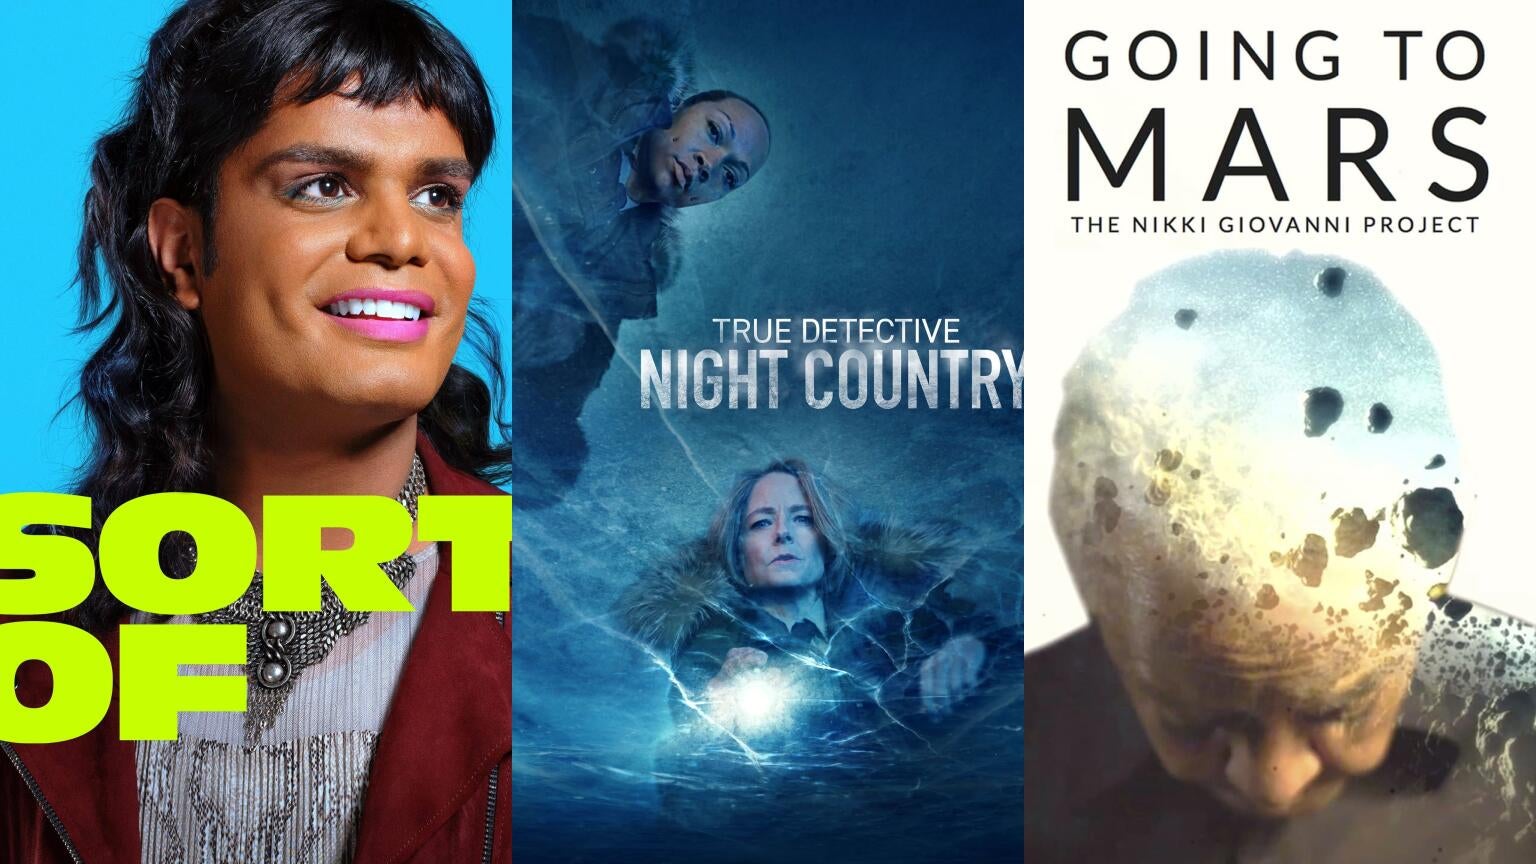 Posters for "Sort Of," "True Detective: North Country," and "Going to Mars: The Nikki Giovanni Project" on Max